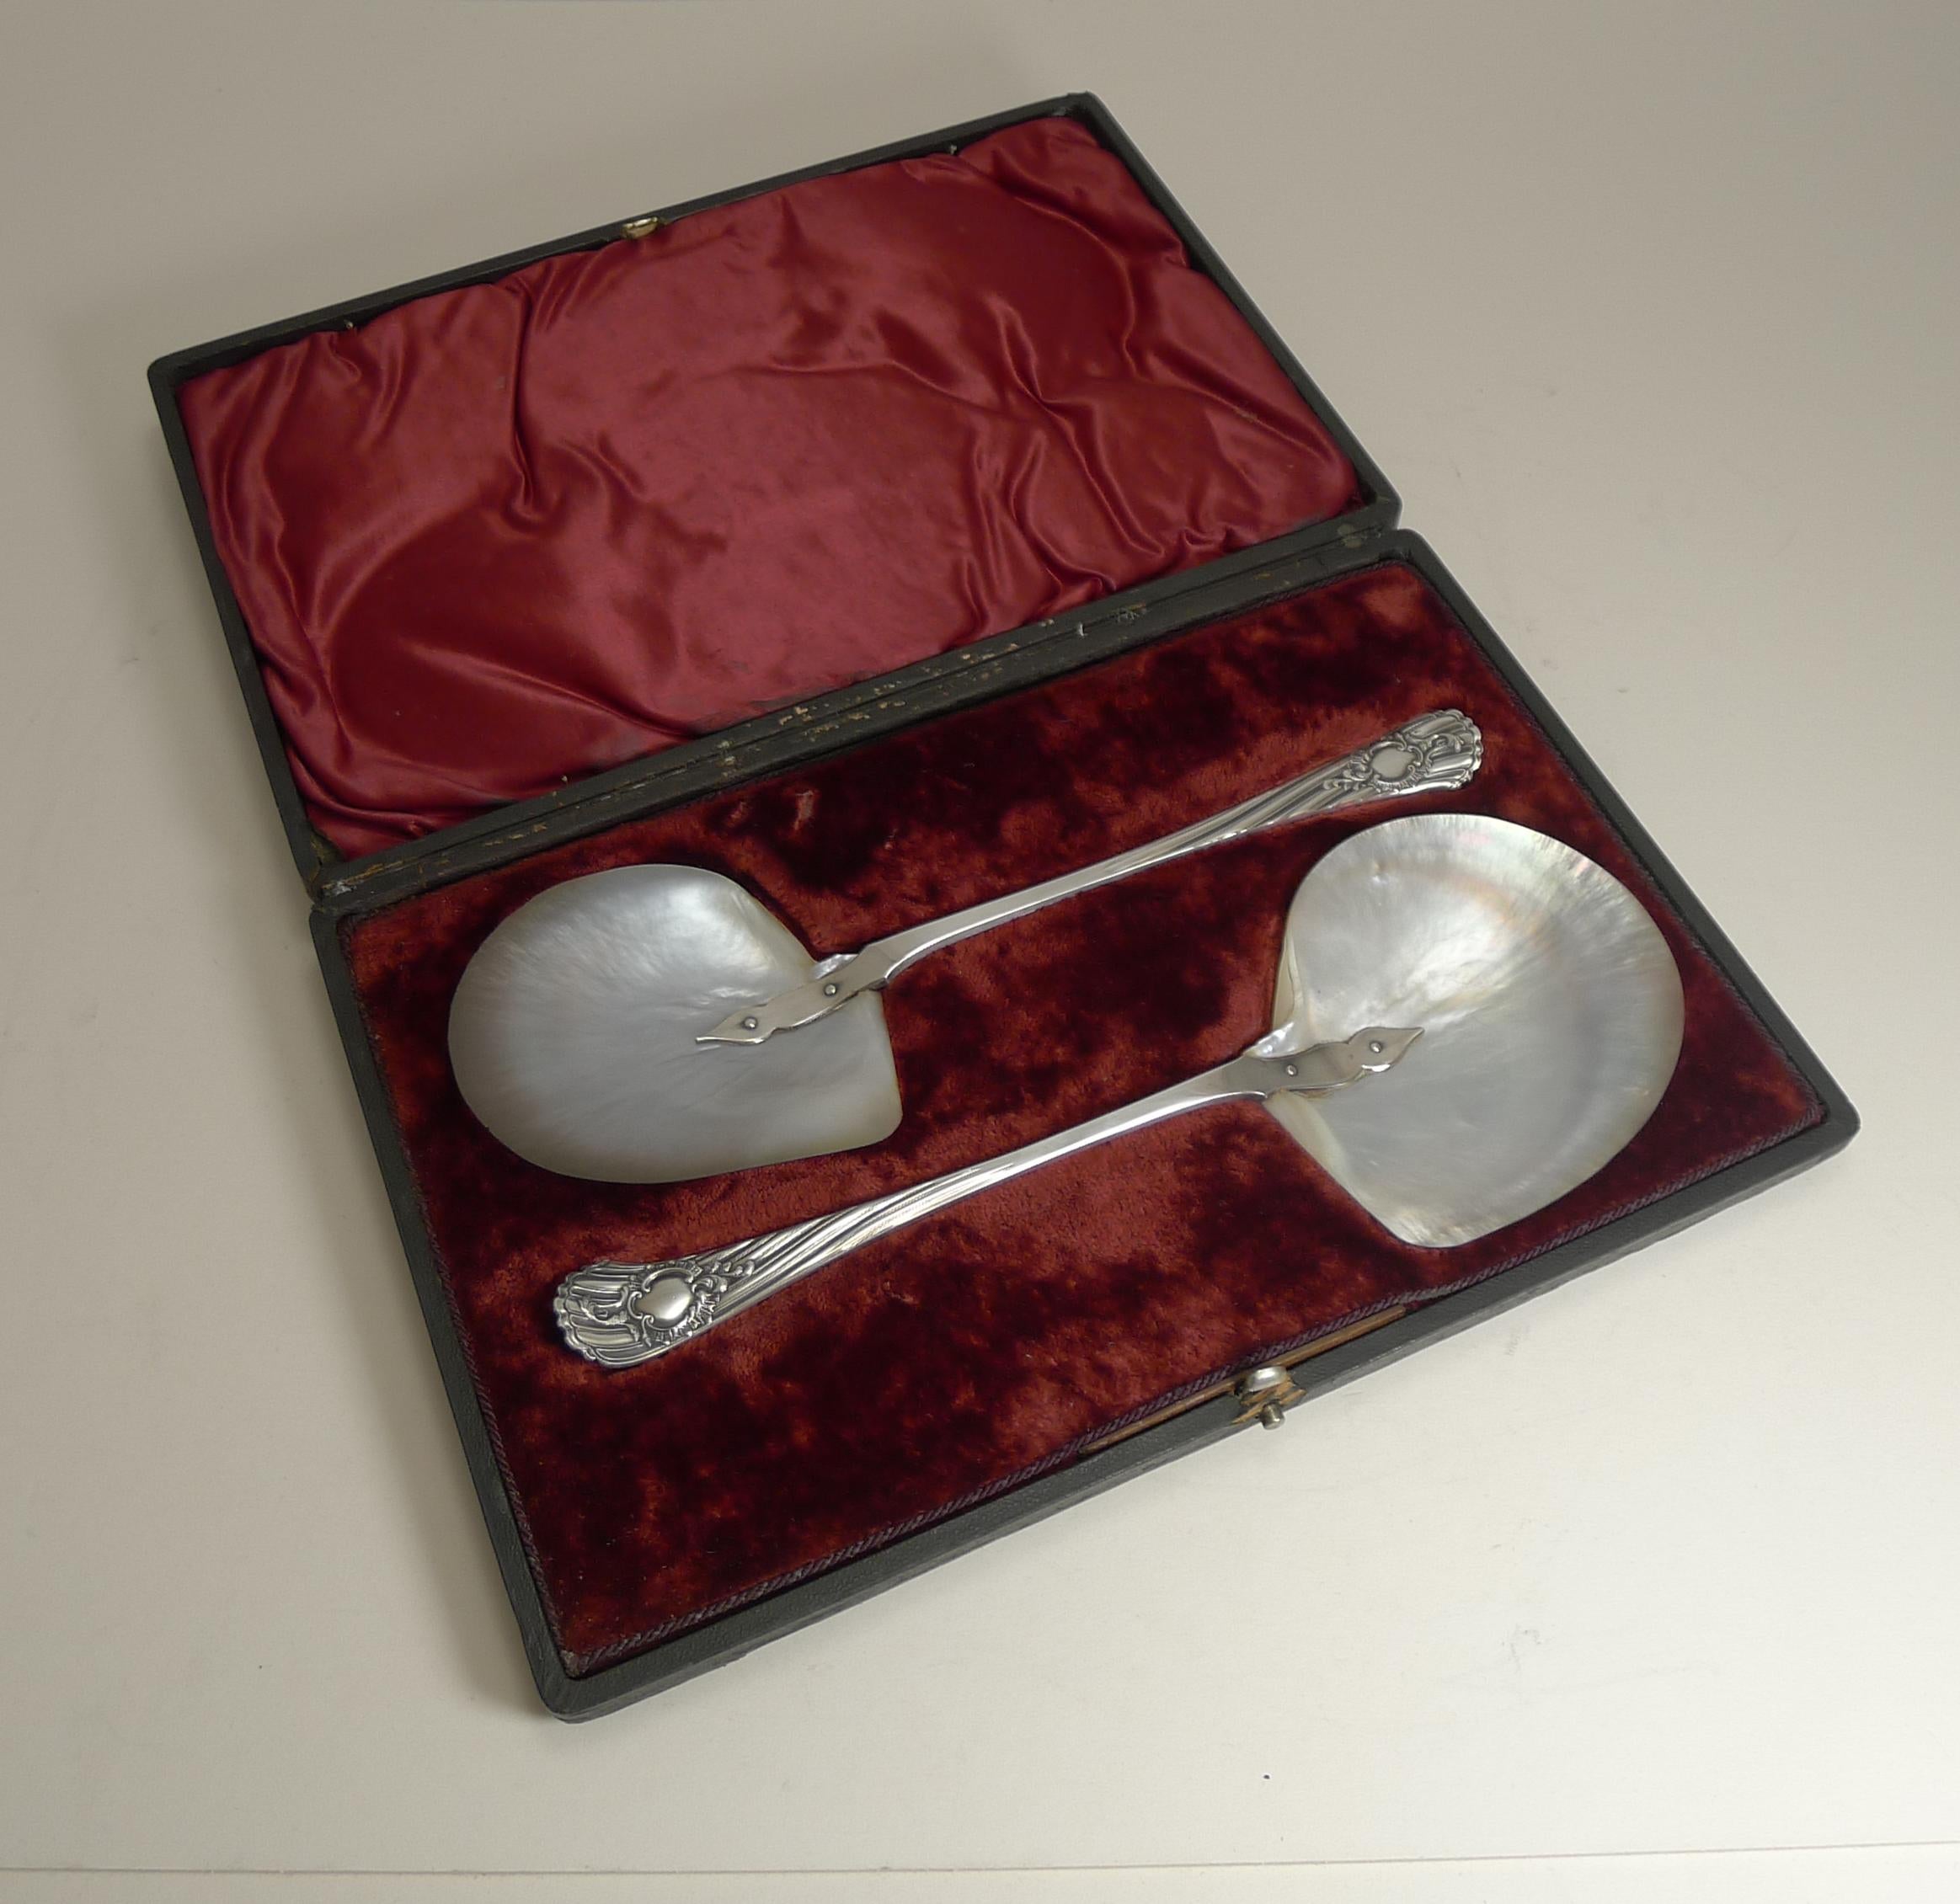 Truly magnificent to find a pair of these wonderful large Caviar serving spoons complete in their original Victorian presentation case.

The handles are made from English silver plate signed by the top-notch silversmith, James Dixon. They are also